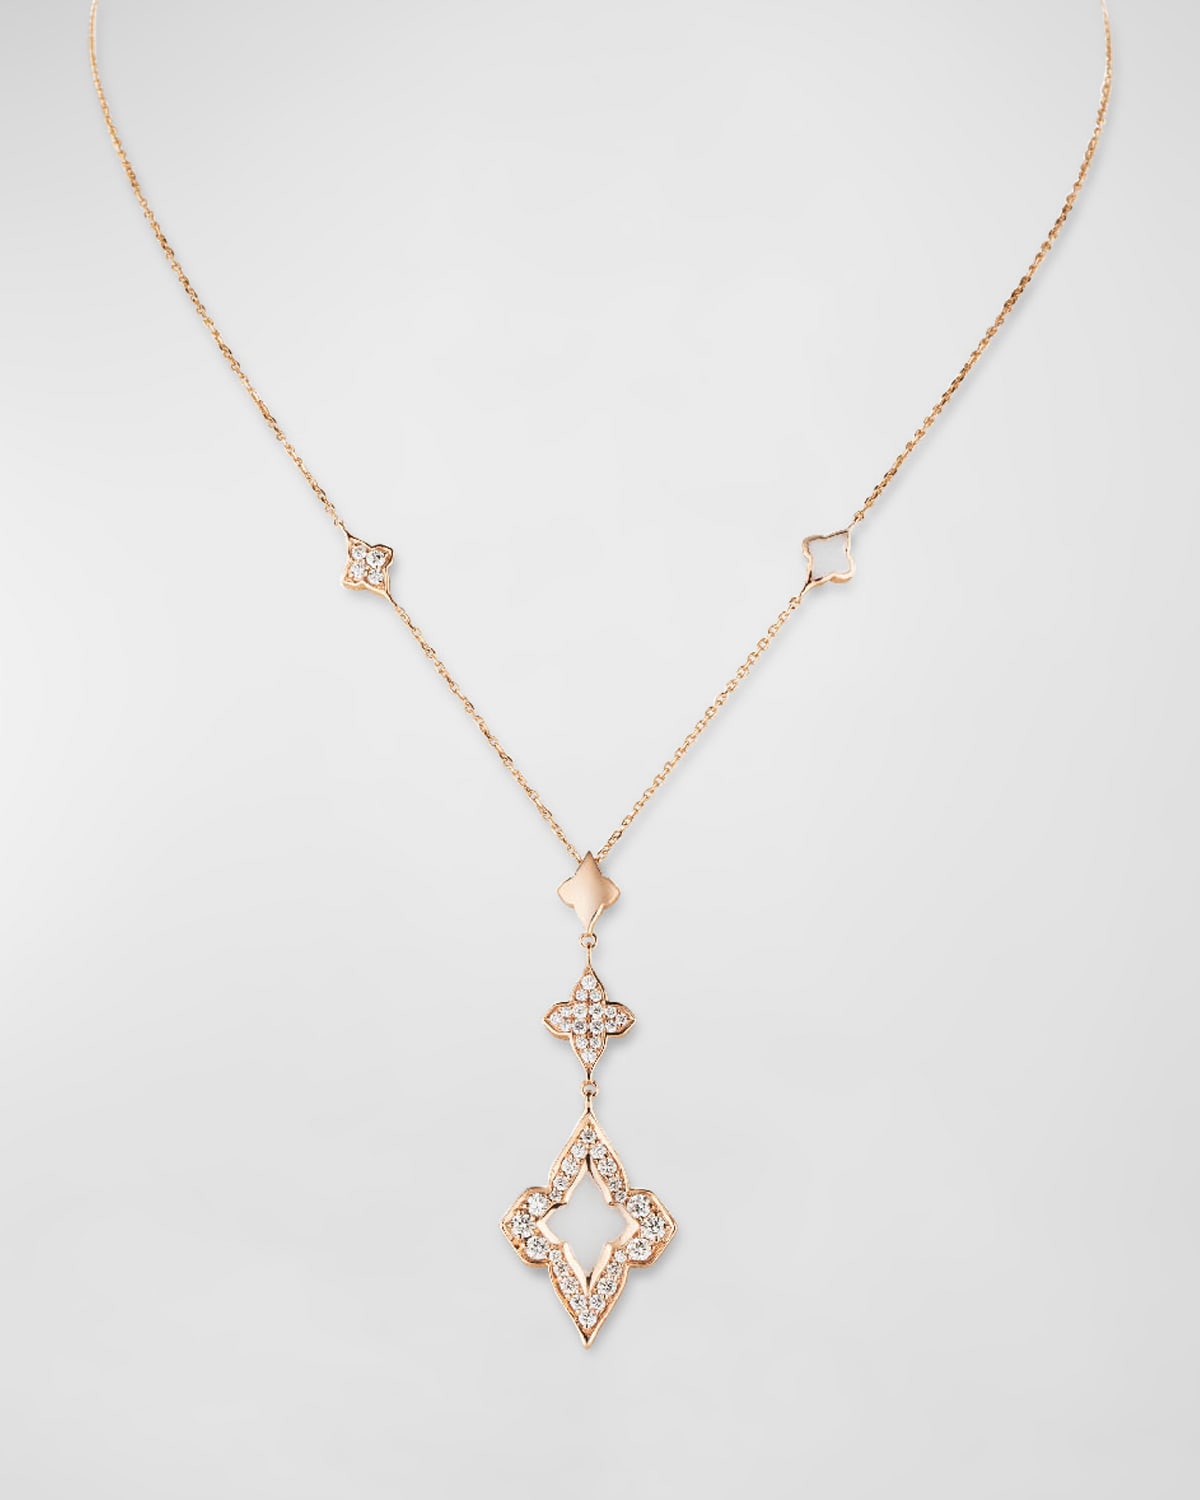 Color Blossom lariat necklace, pink gold, white mother-of-pearl